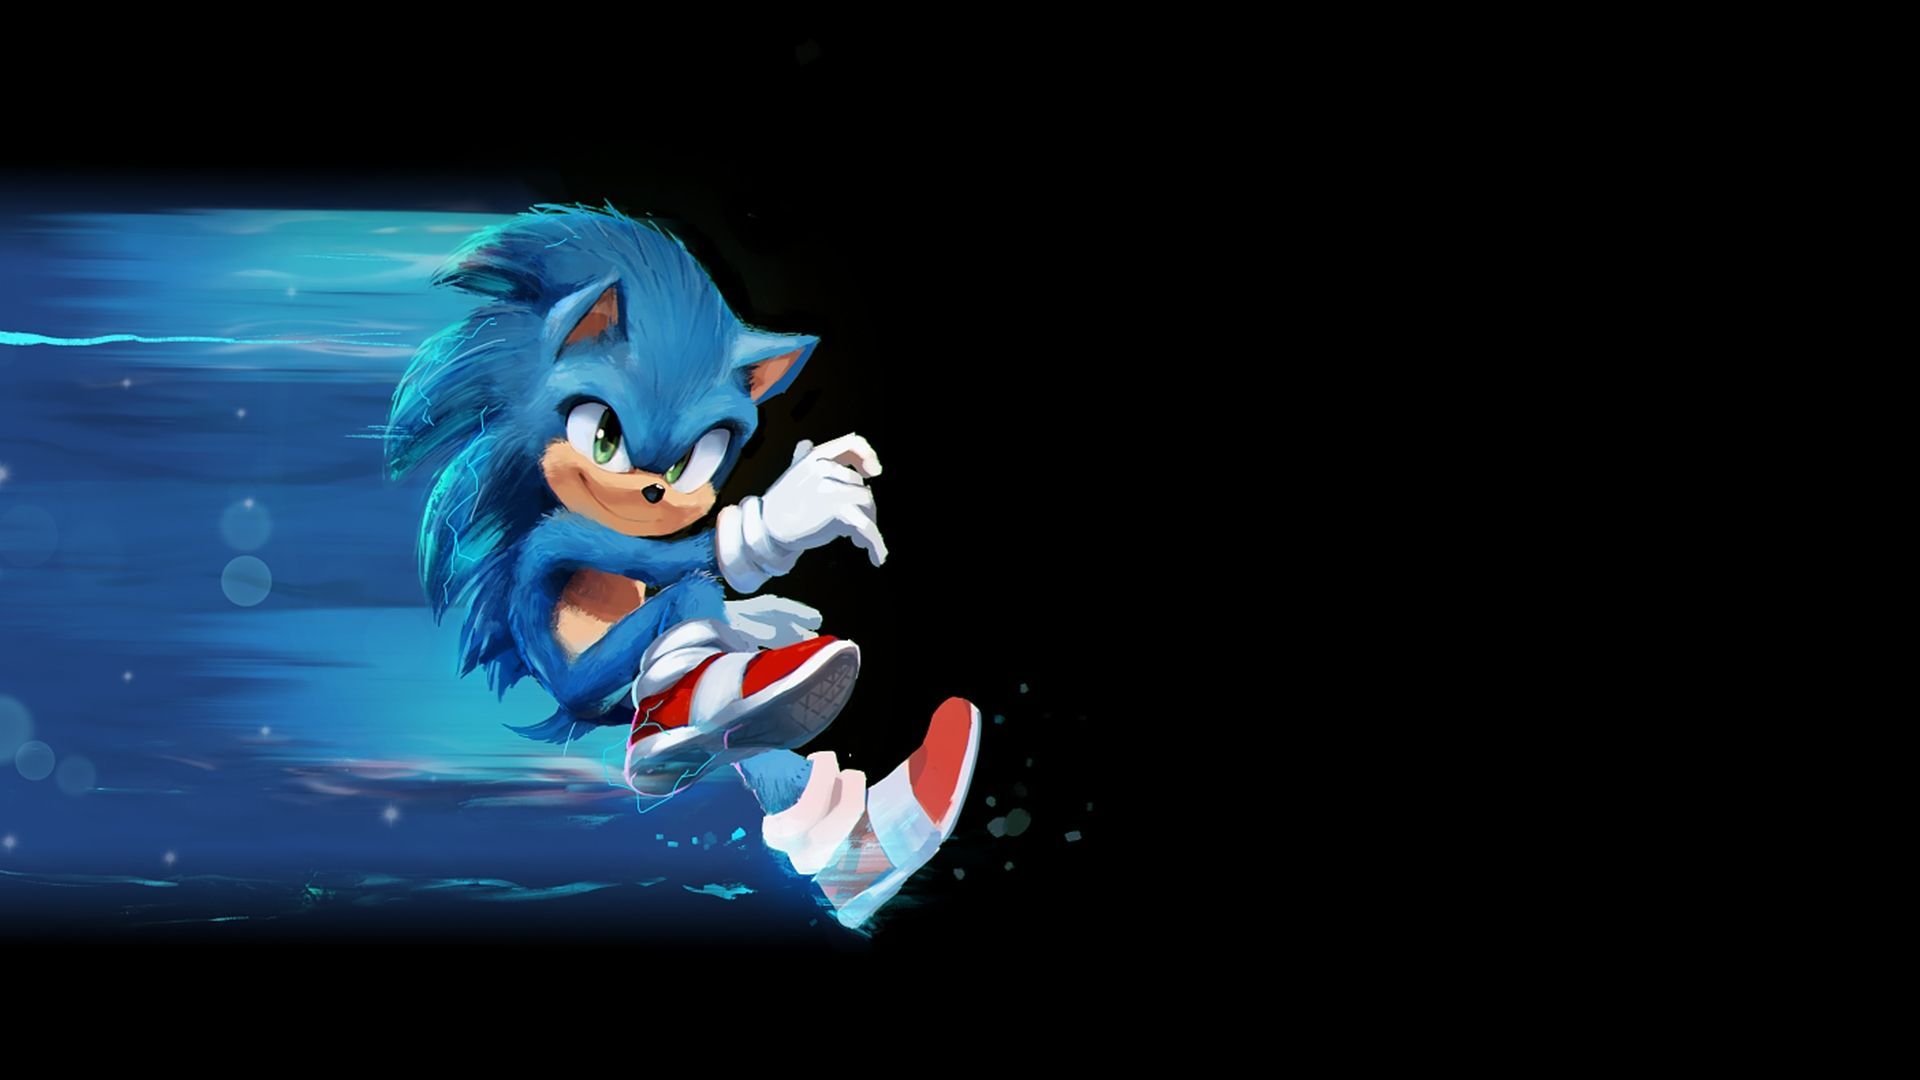 Sonic The Hedgehog Artwork Wallpaper HD Movies 4k with The Awesome Wallpaper of Sonic